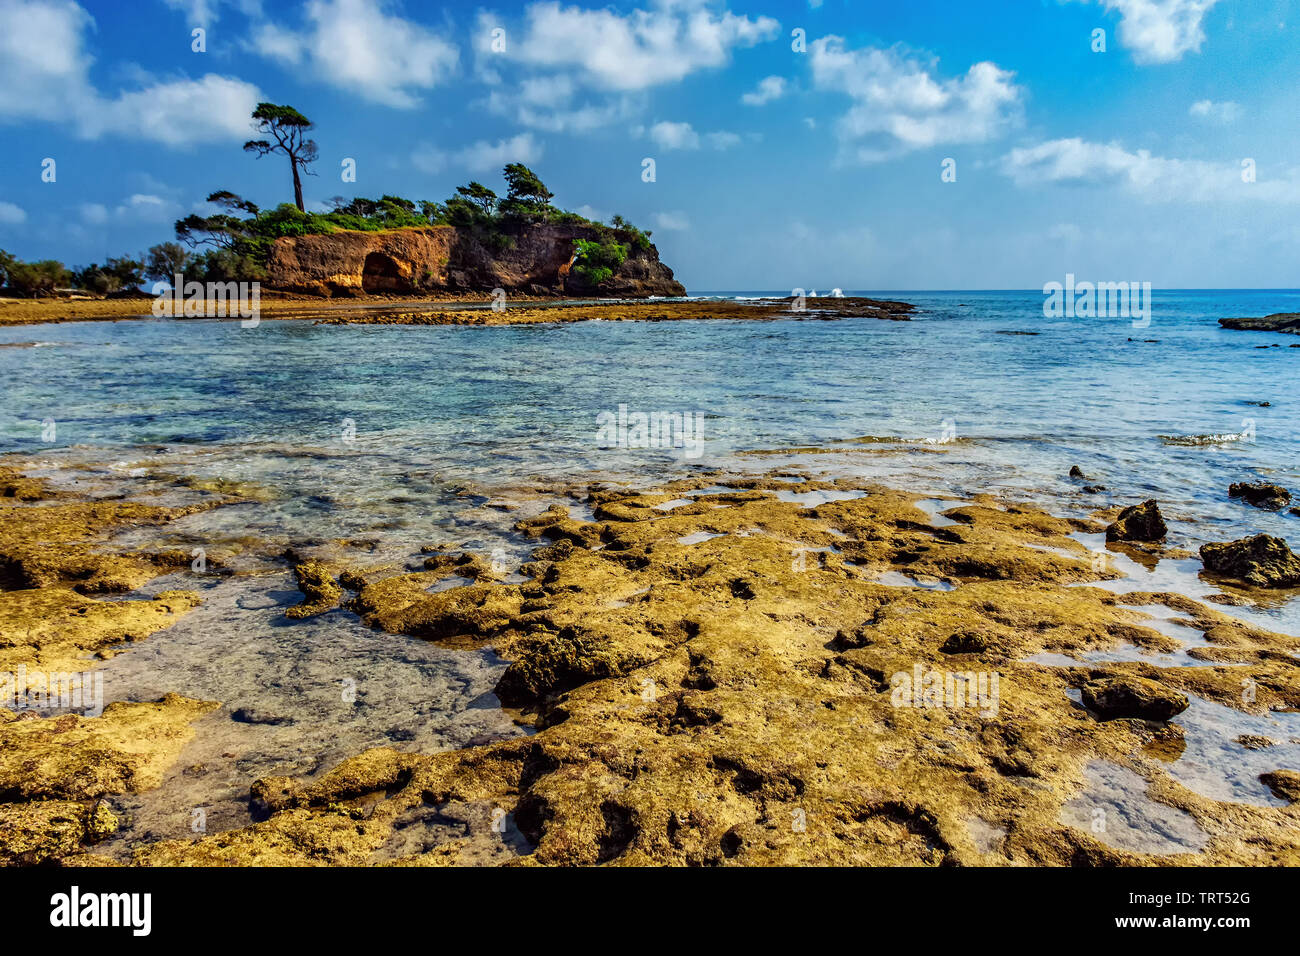 Natural Bridge made of dead coral and sea bed of dead corals at Neil Island, Andaman, Port blare. Stock Photo